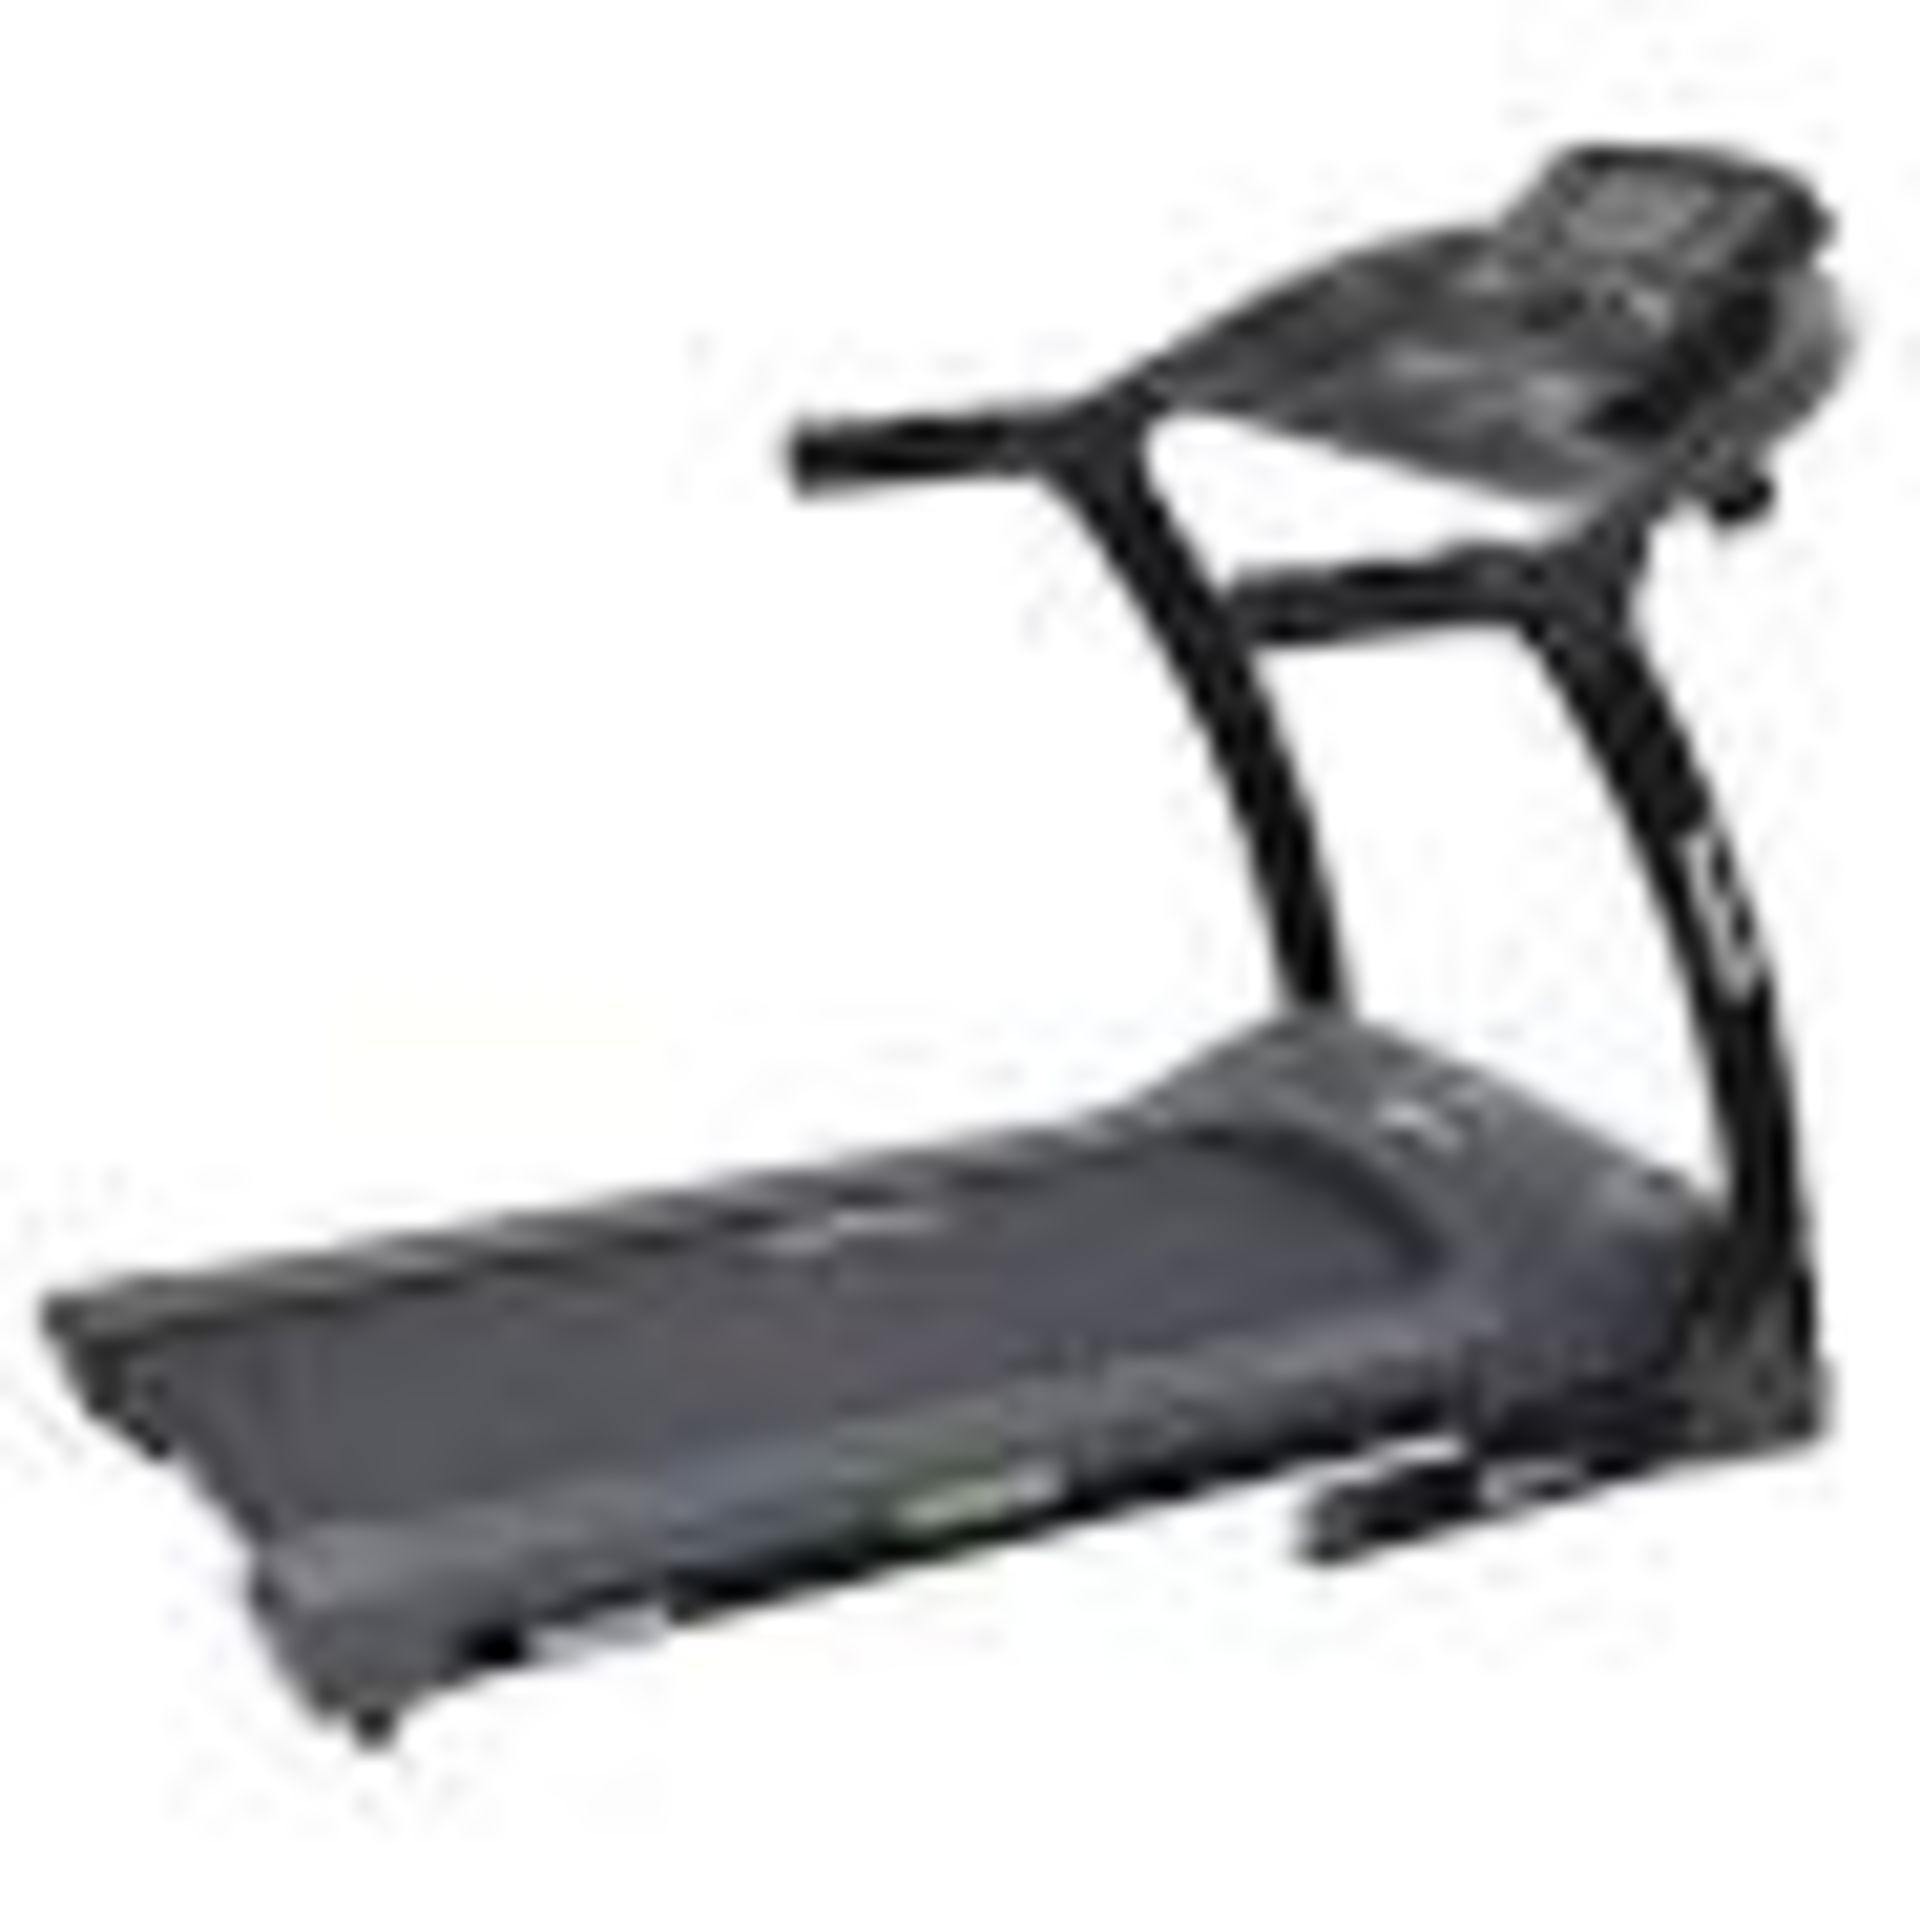 1 X REEBOK ZR11 TREADMILL IN BLACK - BUILT - NO BOX ( TESTED WORKING WITH DAMAGE ON FRONT PLASTIC